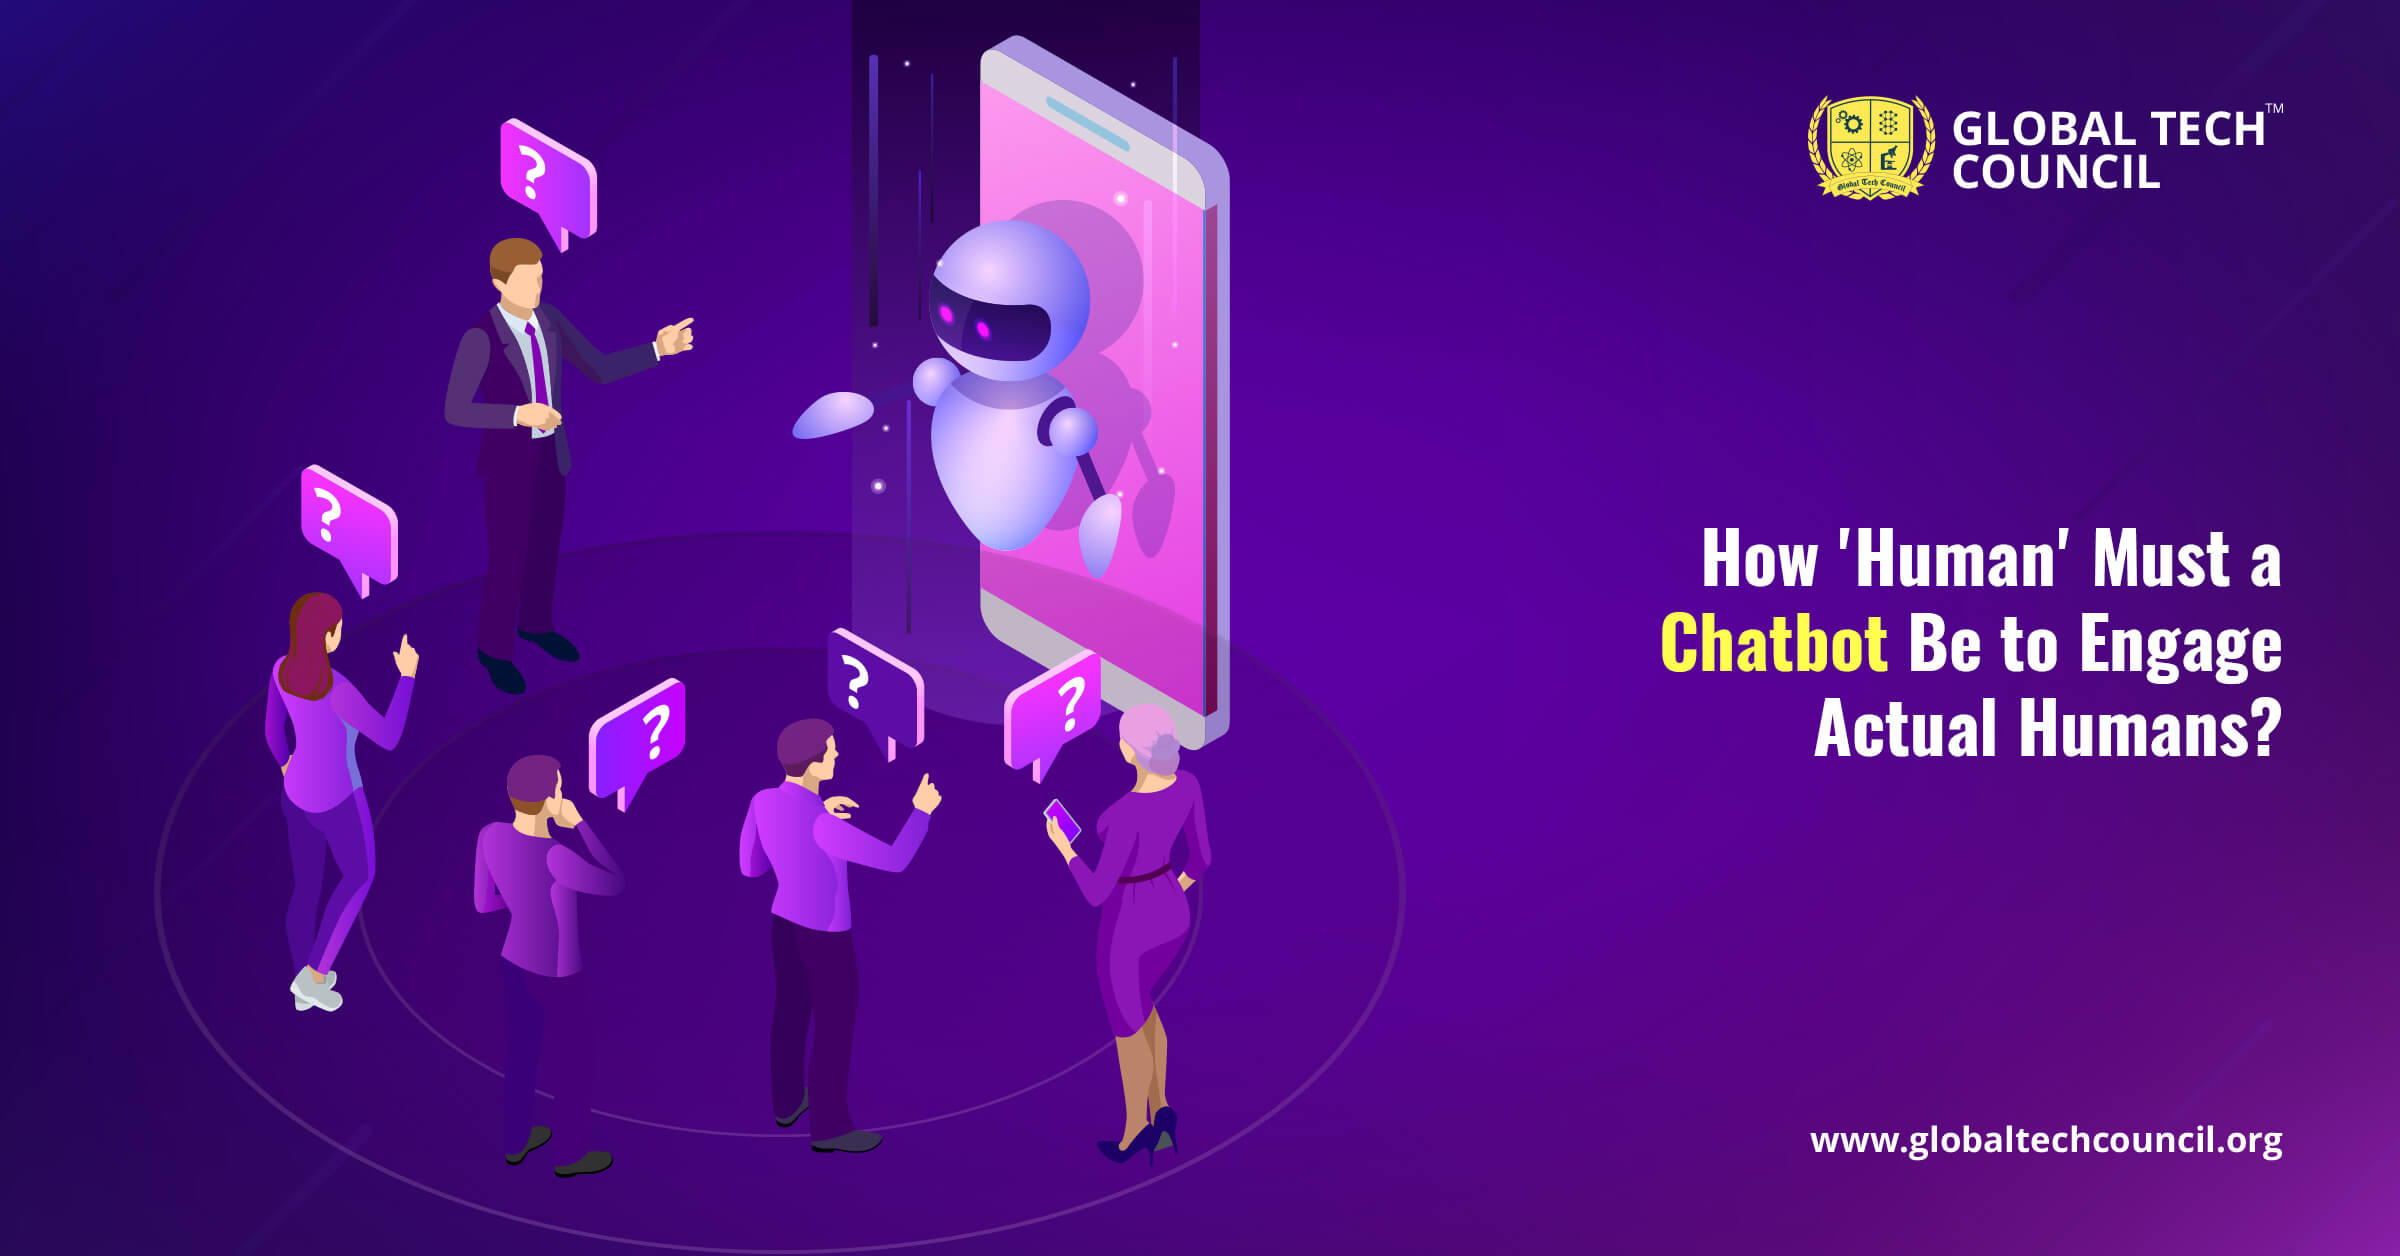 How 'Human' Must a Chatbot Be to Engage Actual Humans